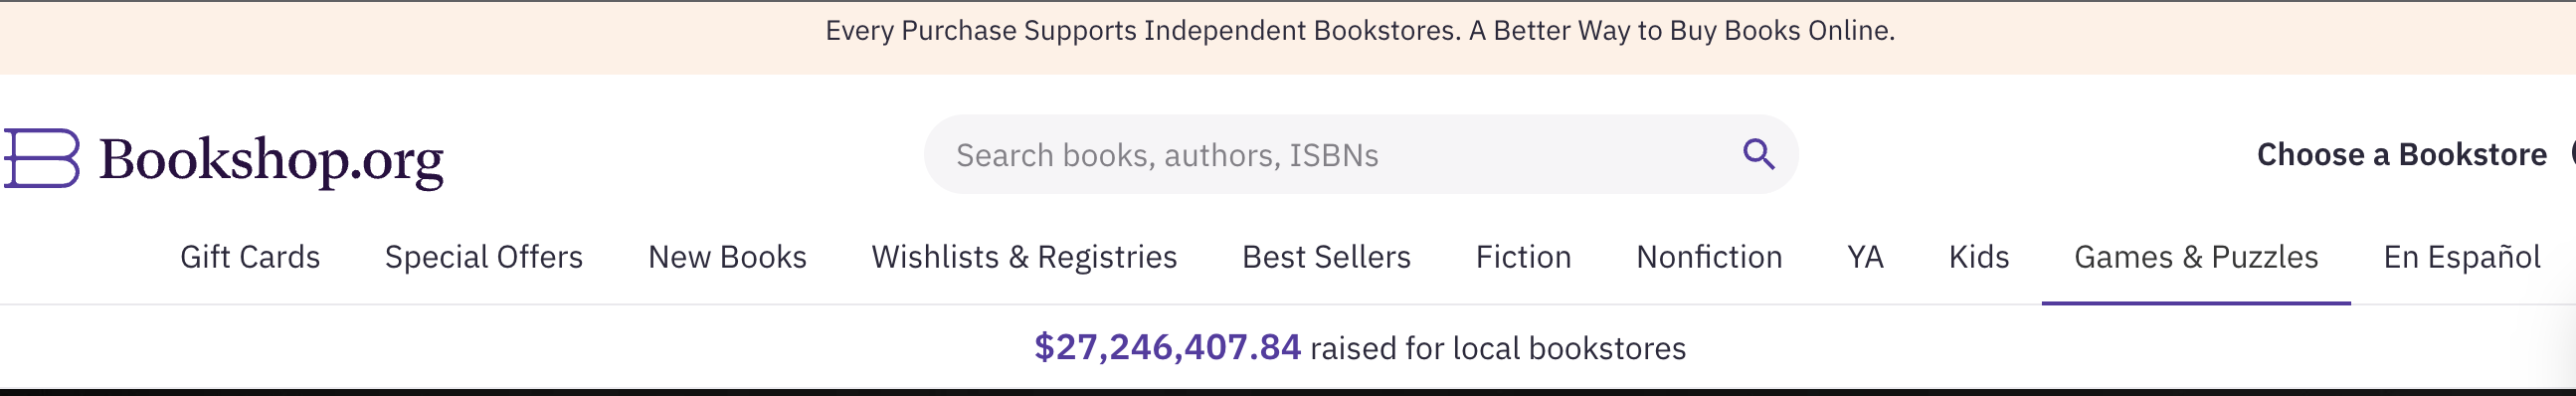 A screenshot of the Bookshop.org homepage showing the more than $27M the company has raised for local bookstores.